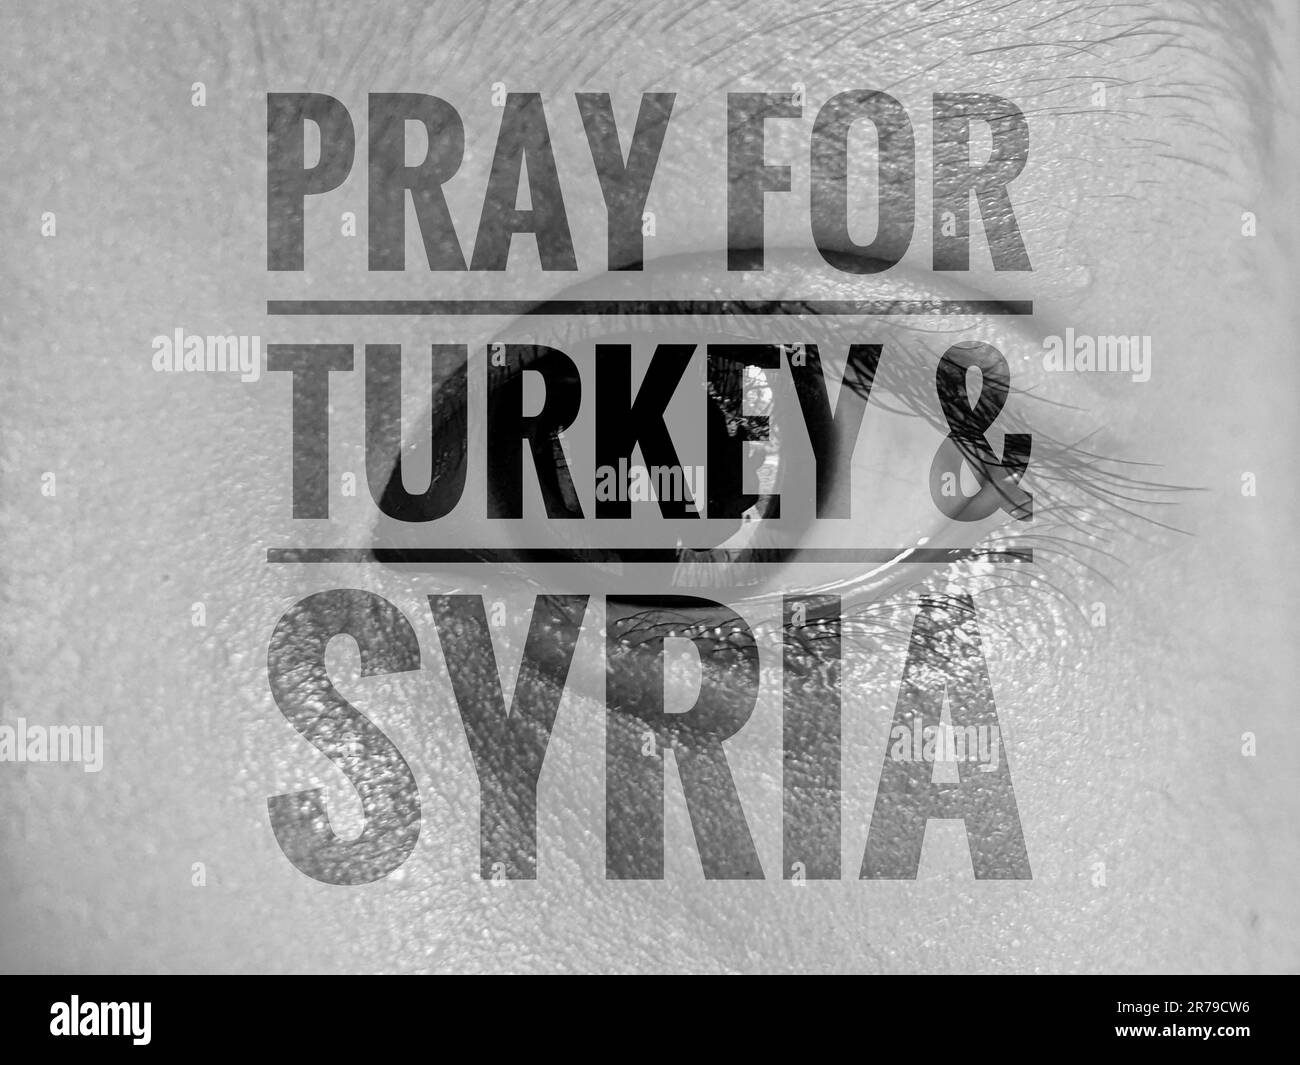 A person eye with the words 'Pray for Turkey' overlaid in text Stock Photo